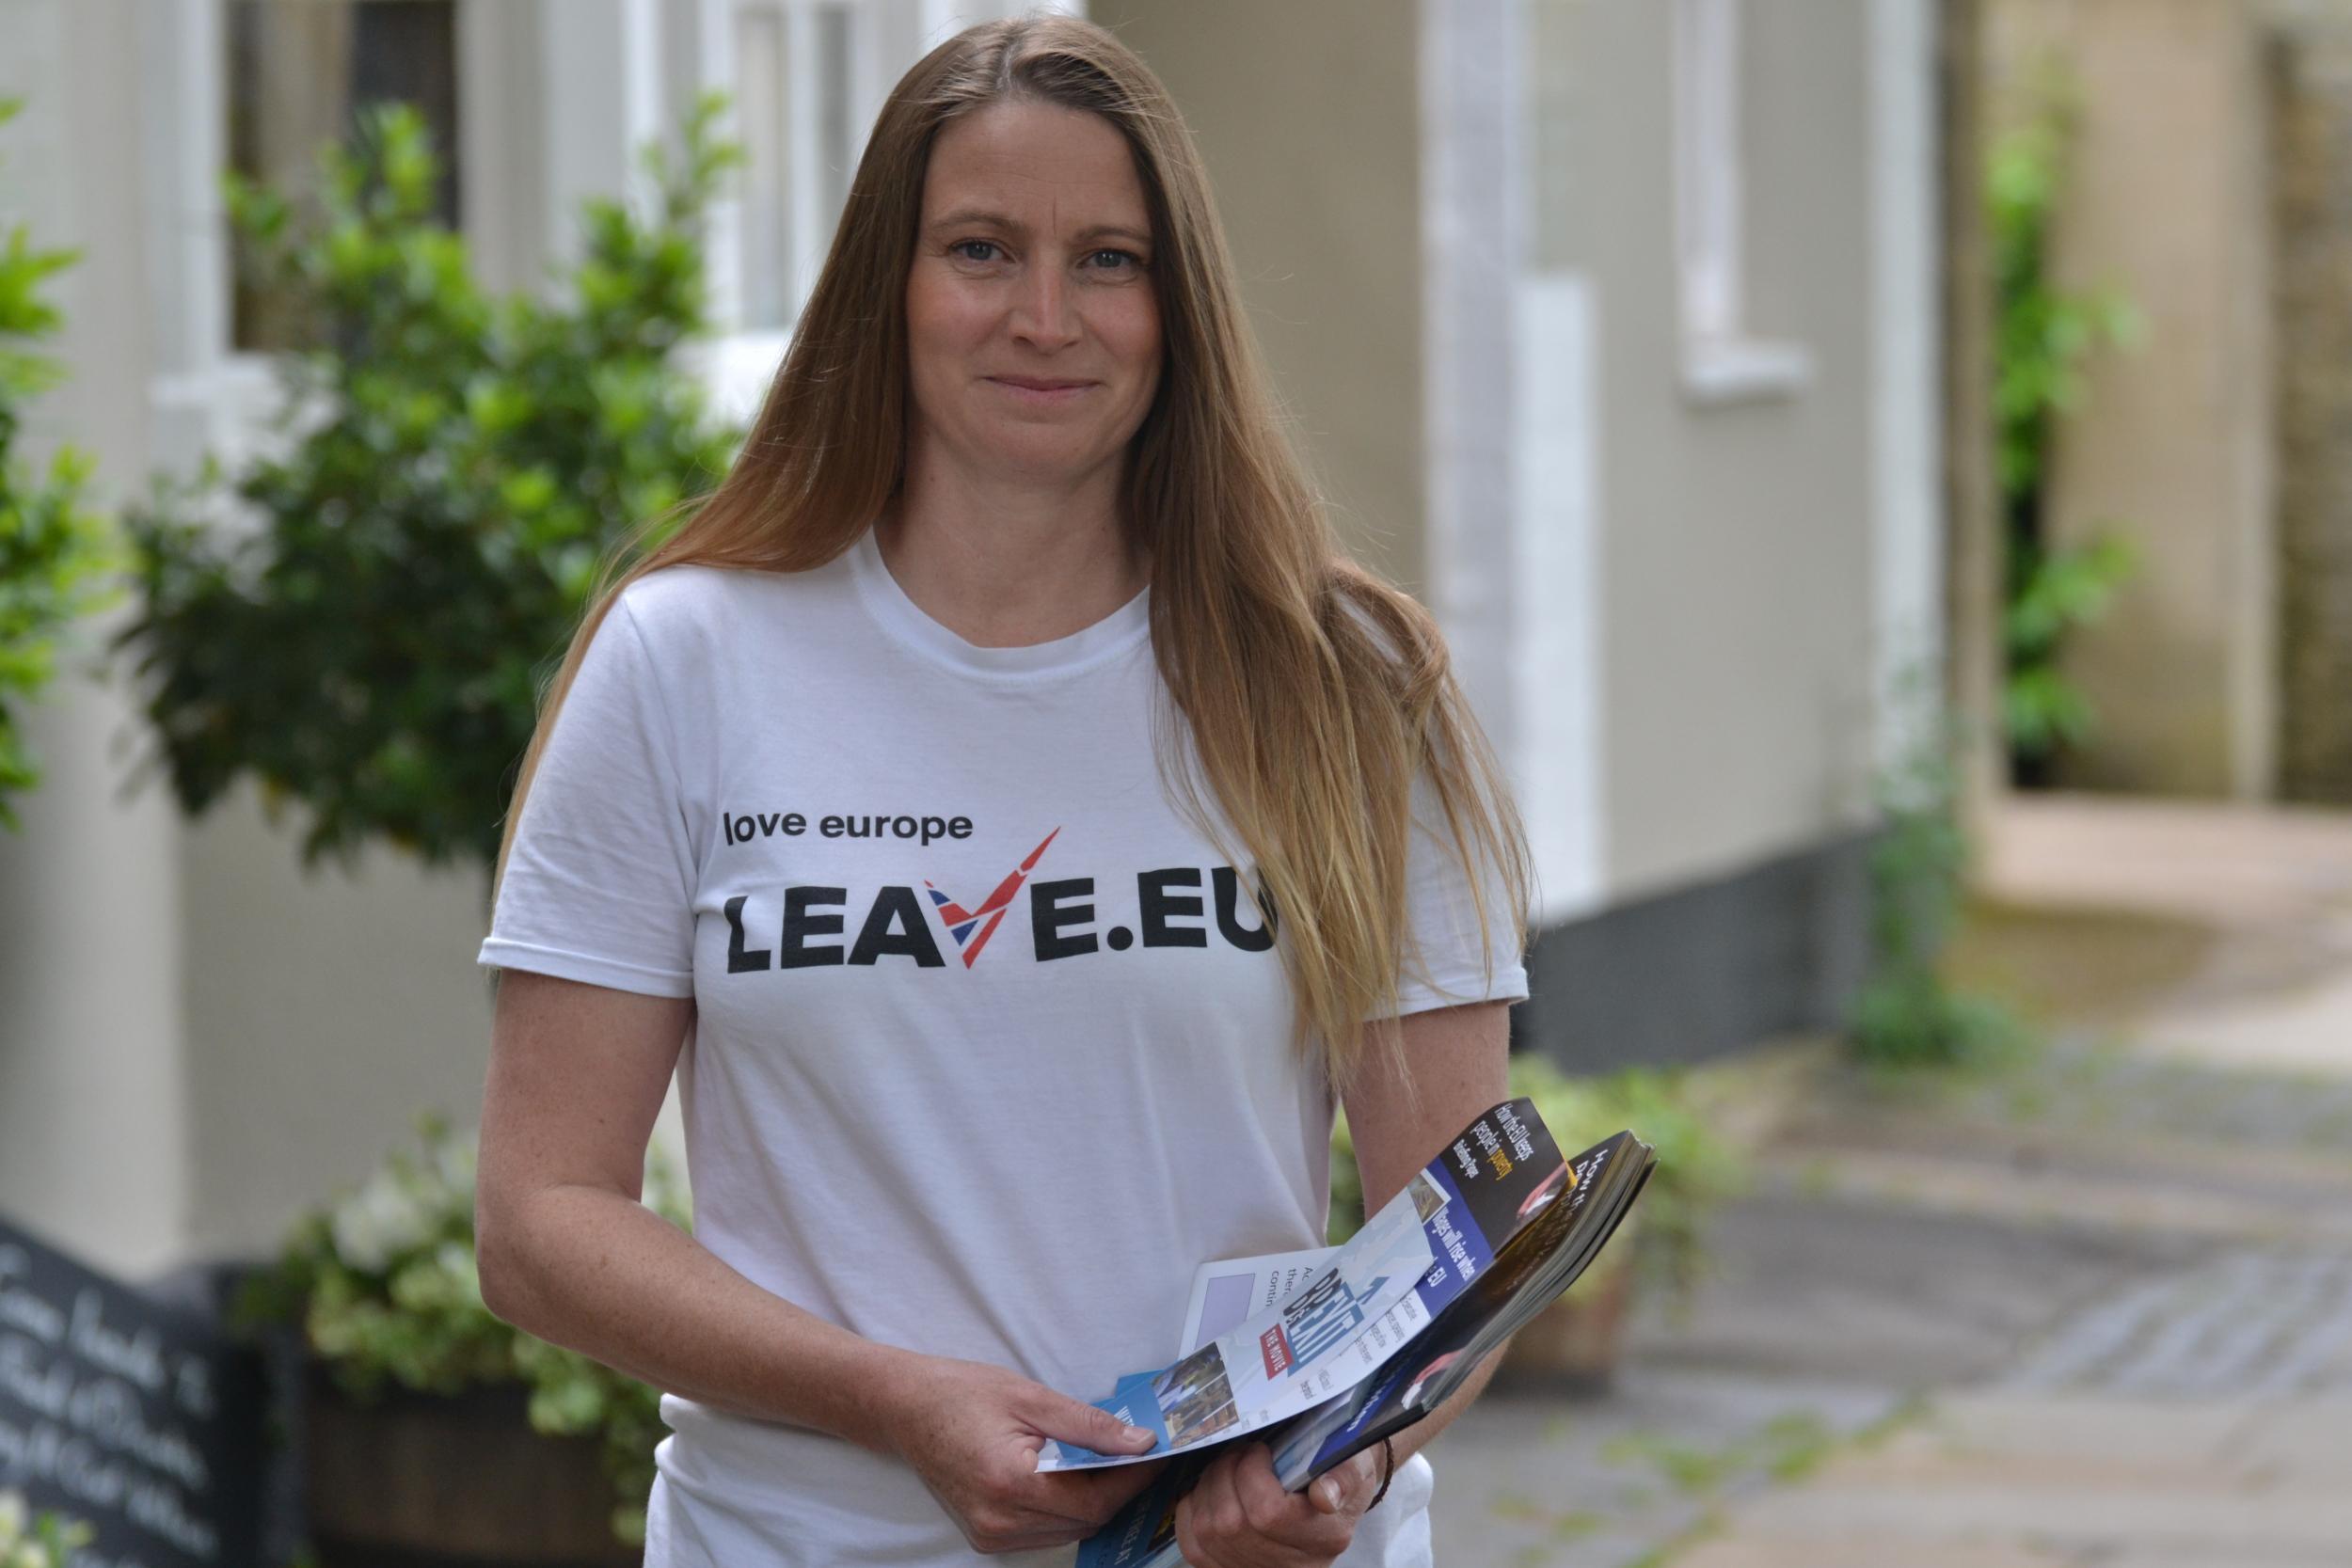 Erika Barnby campaigns locally to help support Leave